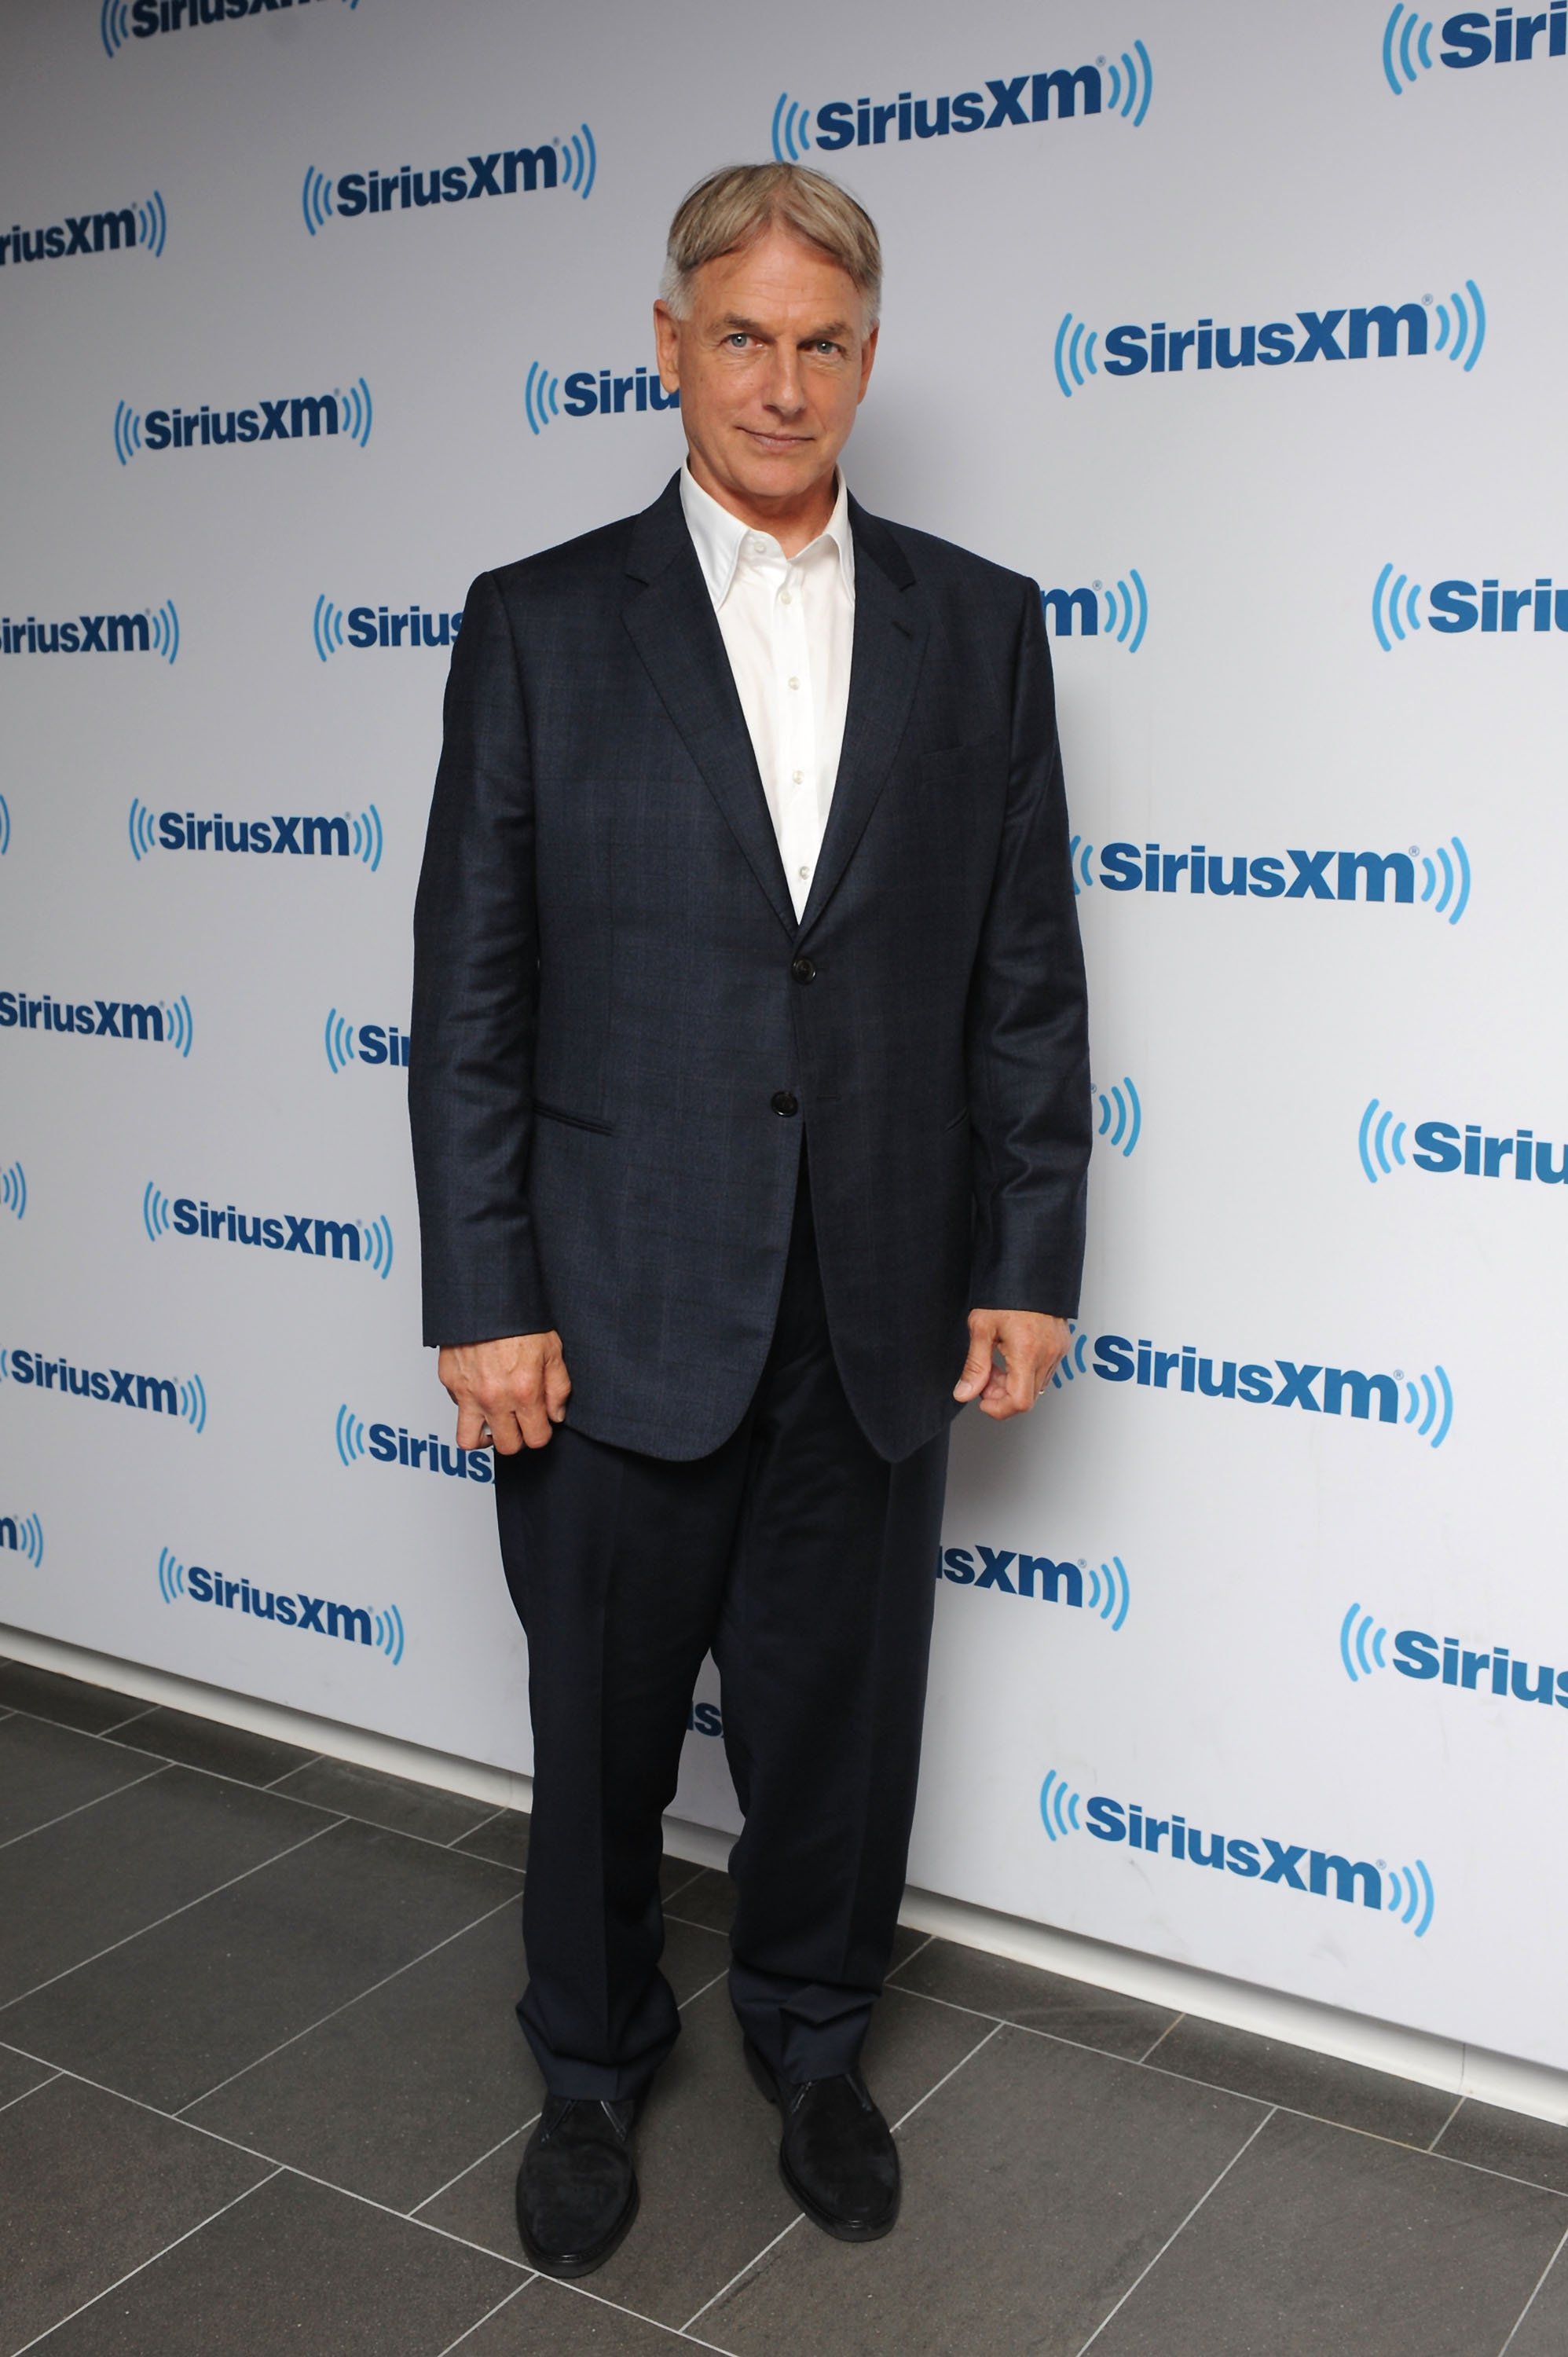 Mark Harmon besucht SiriusXM Studios am 22. September 2014 in New York City | Quelle: Getty Images